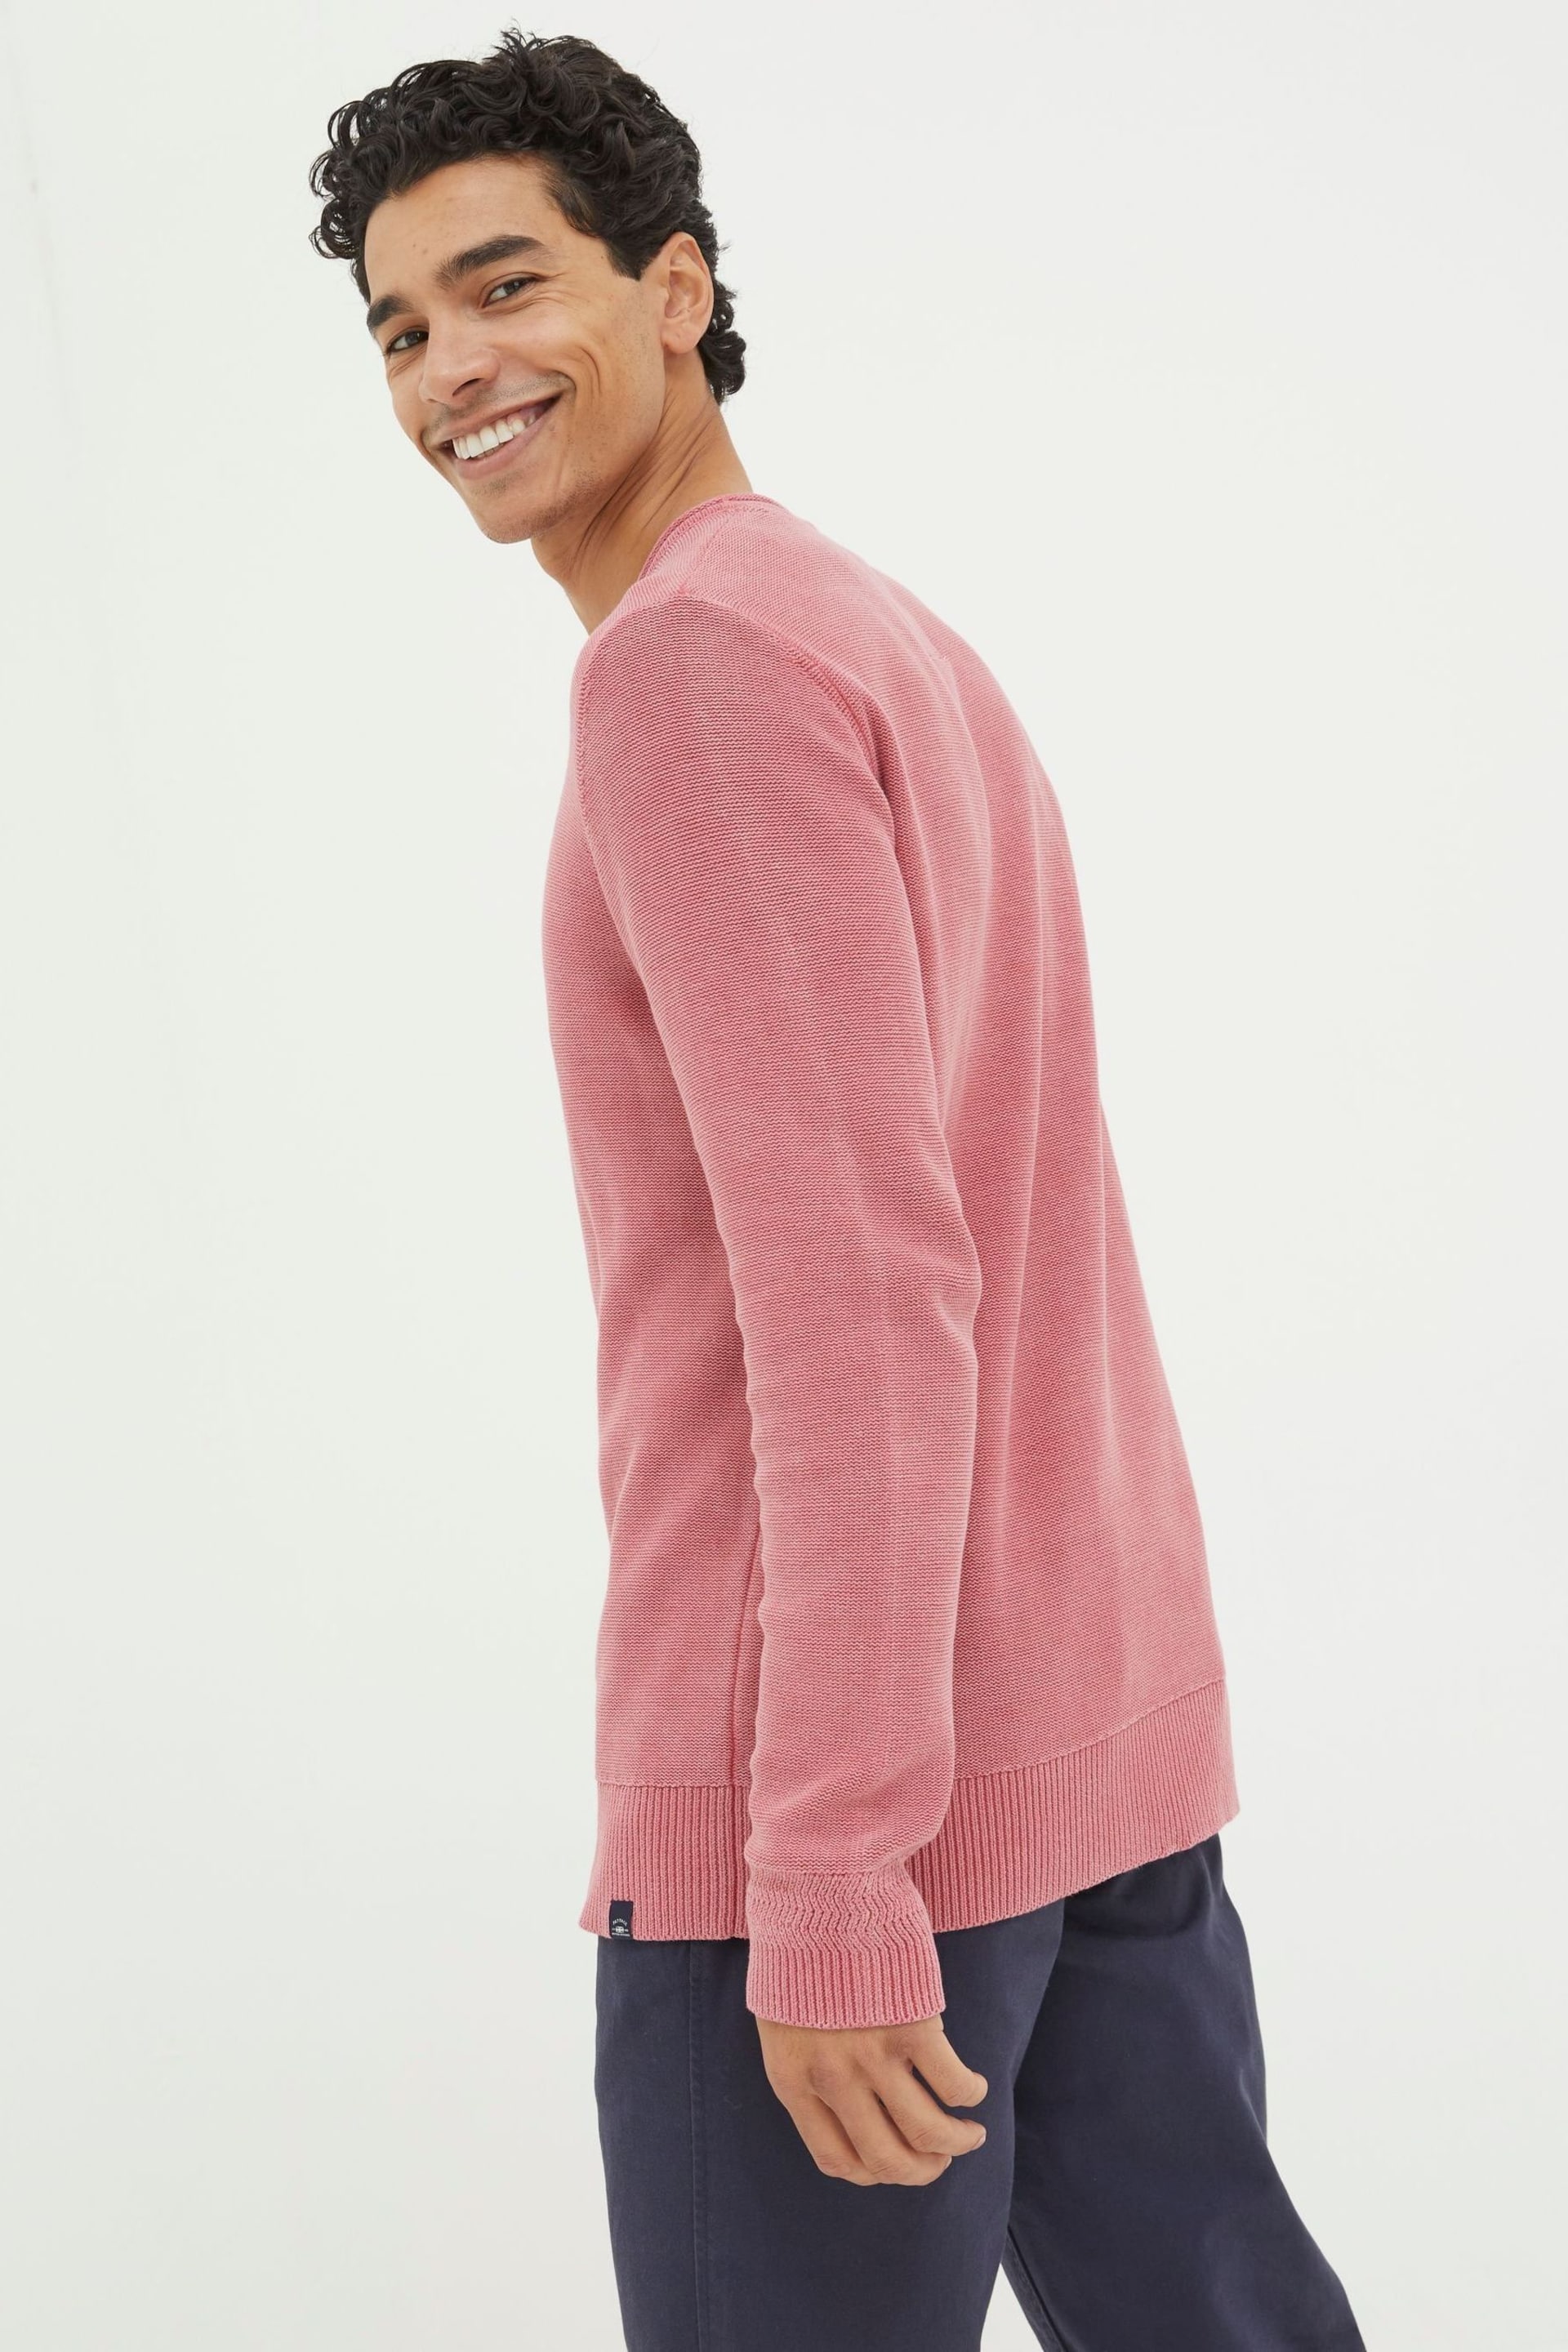 FatFace Red Berwick Washed Crew Jumper - Image 2 of 4